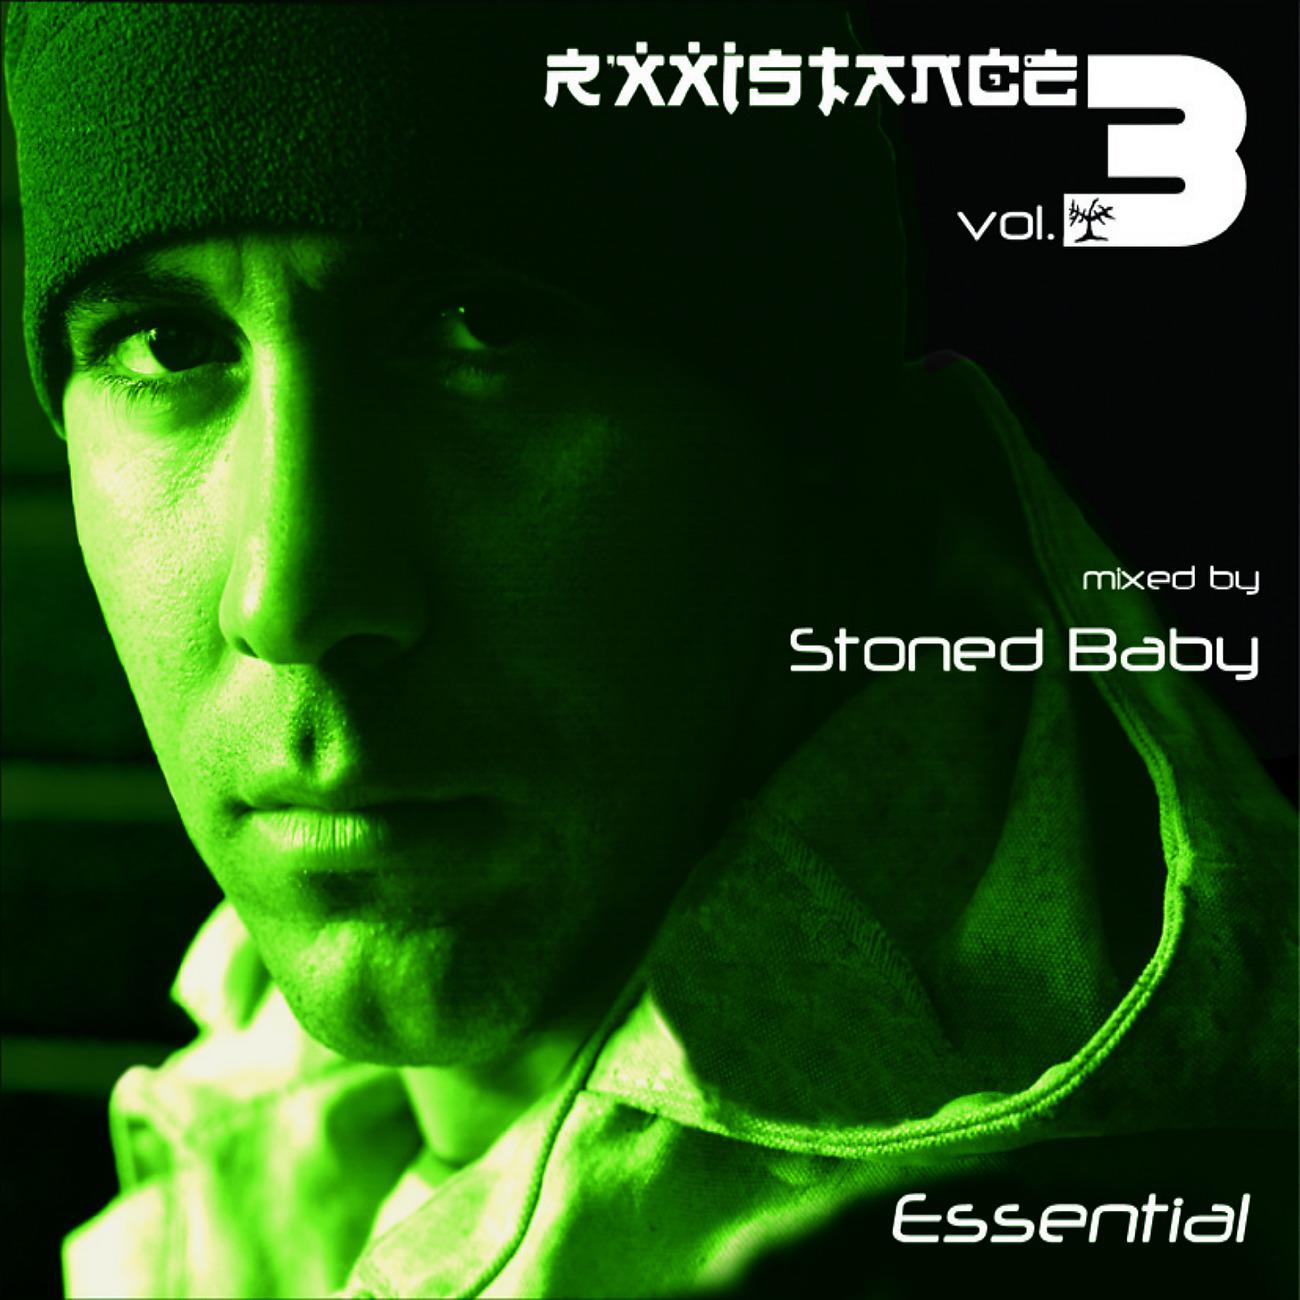 Постер альбома Rxxistance Vol. 3: Essential, Mixed by Stoned Baby